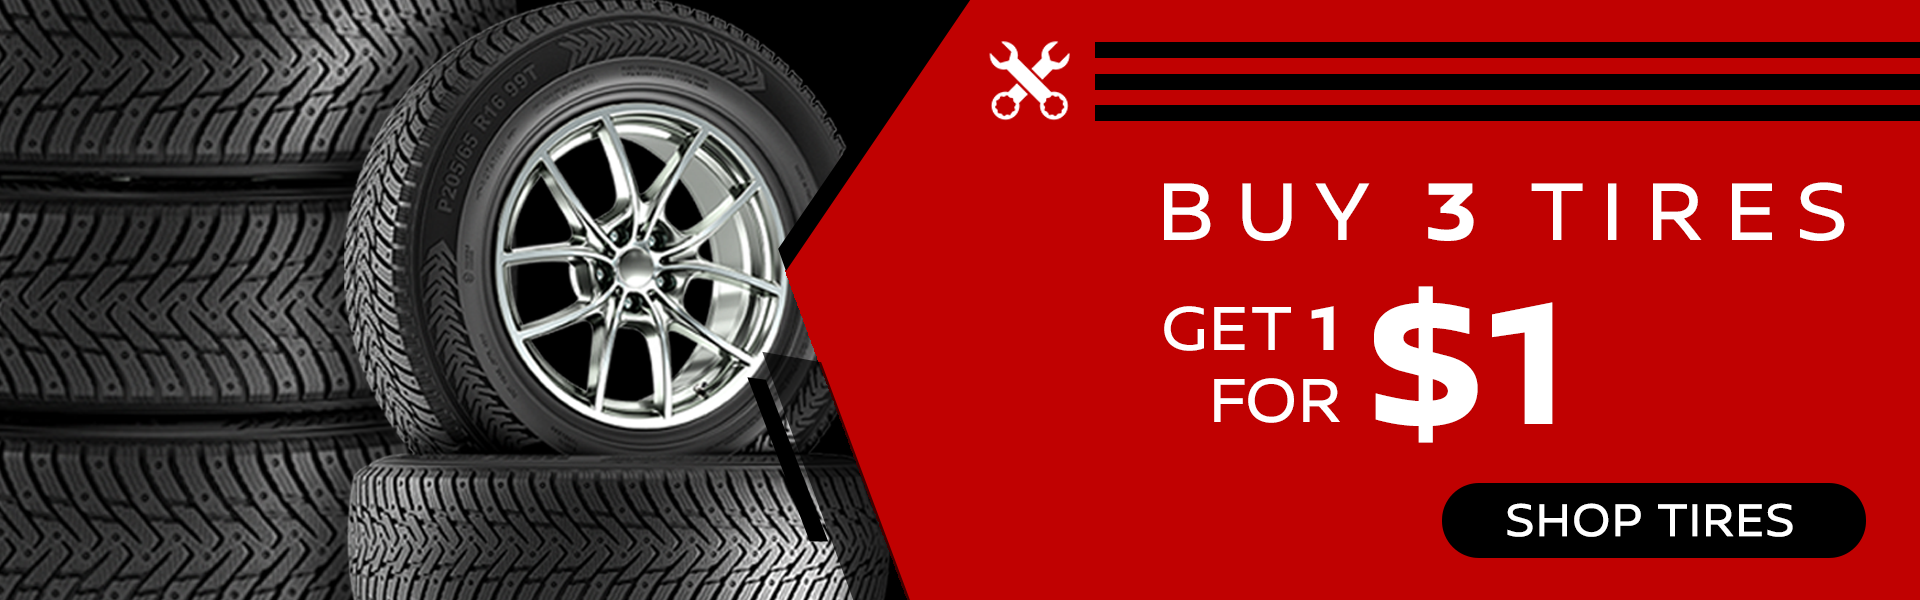 Buy 3 Tires, Get 1 for $1*